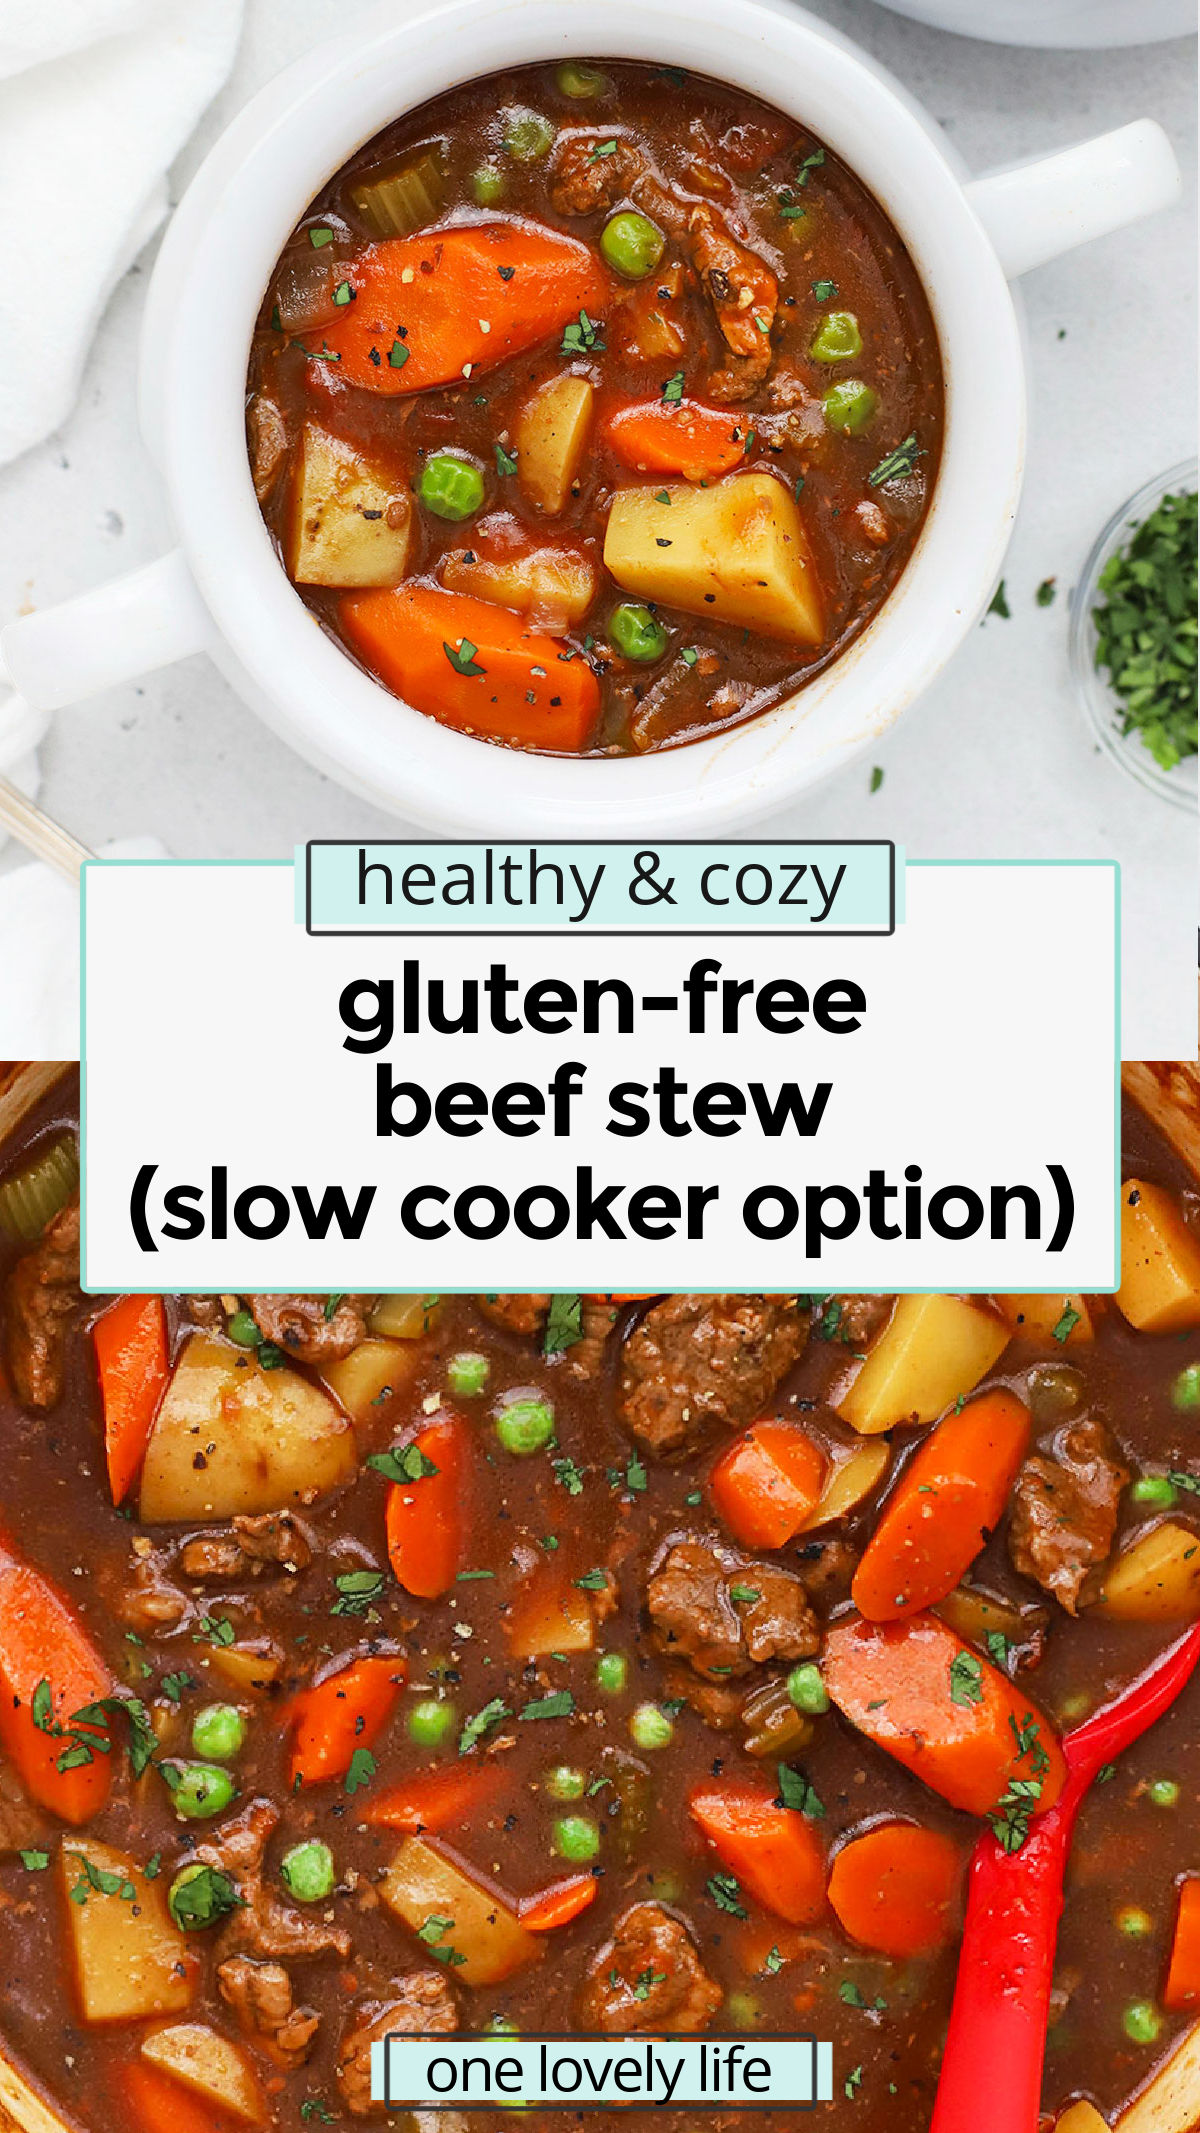 This Gluten-Free Beef Stew recipe is cozy, hearty & delicious. Make it on the stovetop, in the oven, or in the slow cooker. You'll love it! // slow cooker gluten-free beef stew recipe / healthy beef stew recipe / gluten-free dutch oven beef stew / beef stew in the oven / beef stew without flour / the best gluten-free beef stew recipe / healthy stew / slow cooker stew / stovetop beef stew